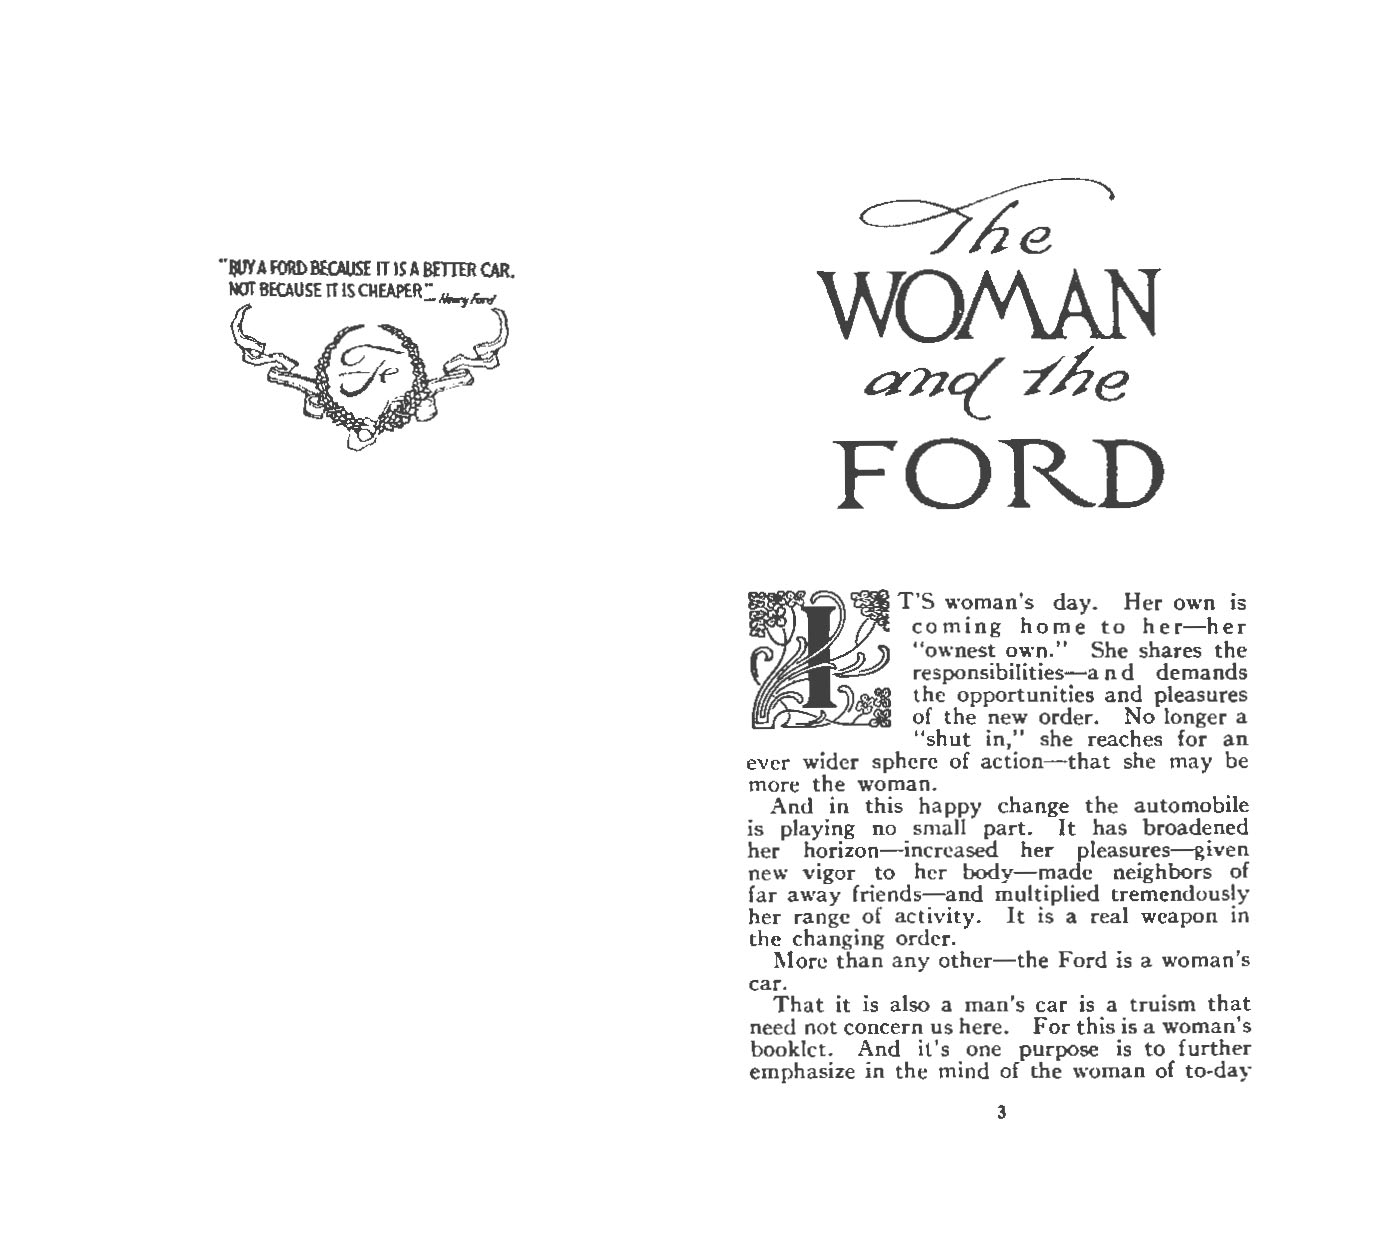 n_1912 The Woman & the Ford-02-03.jpg